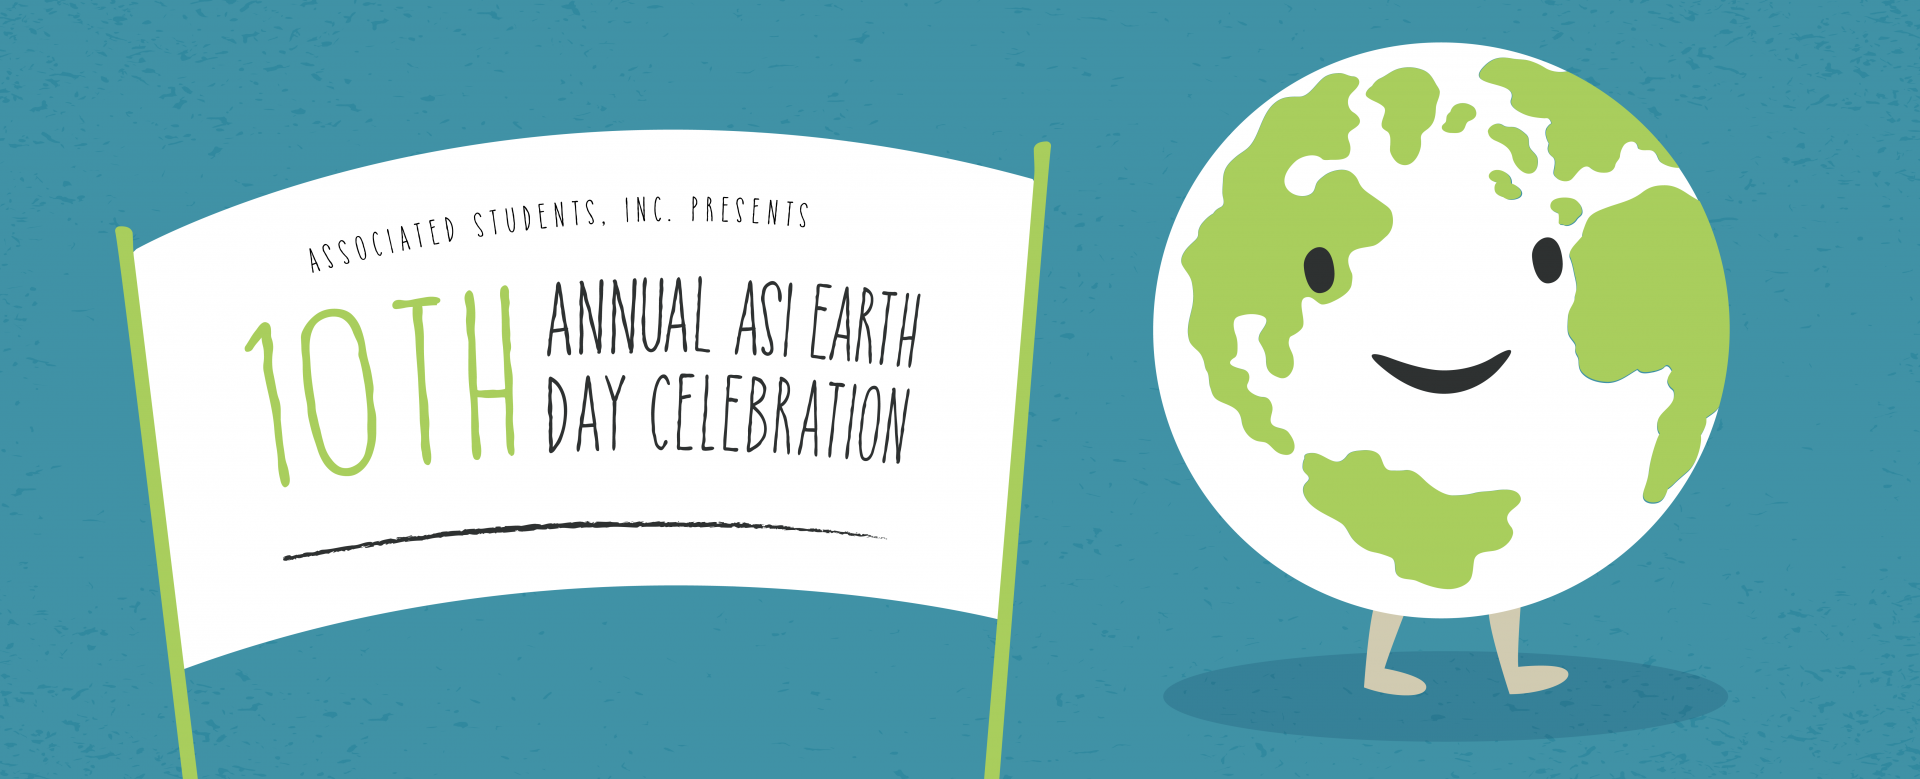 10th Annual ASI Earth Day Celebration